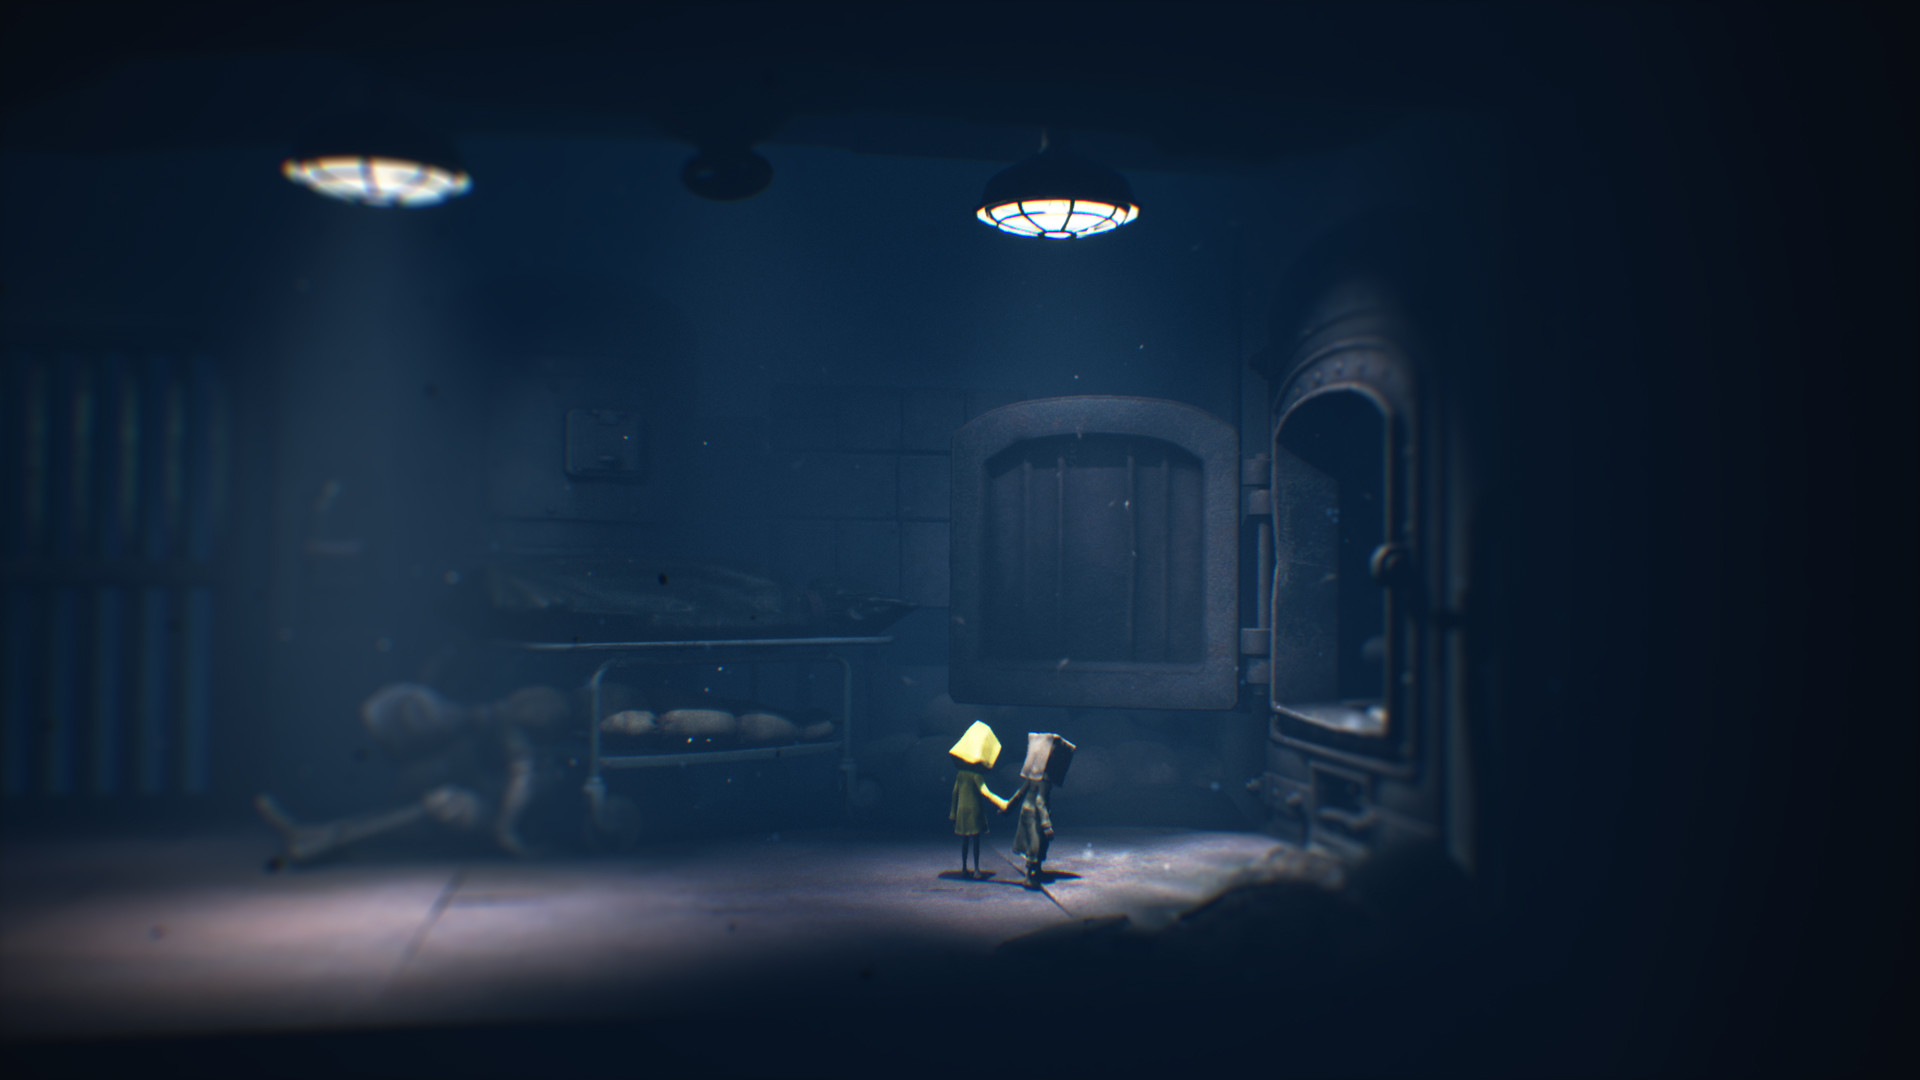 Little Nightmares II Mobile - Download & Play for Android APK & iOS